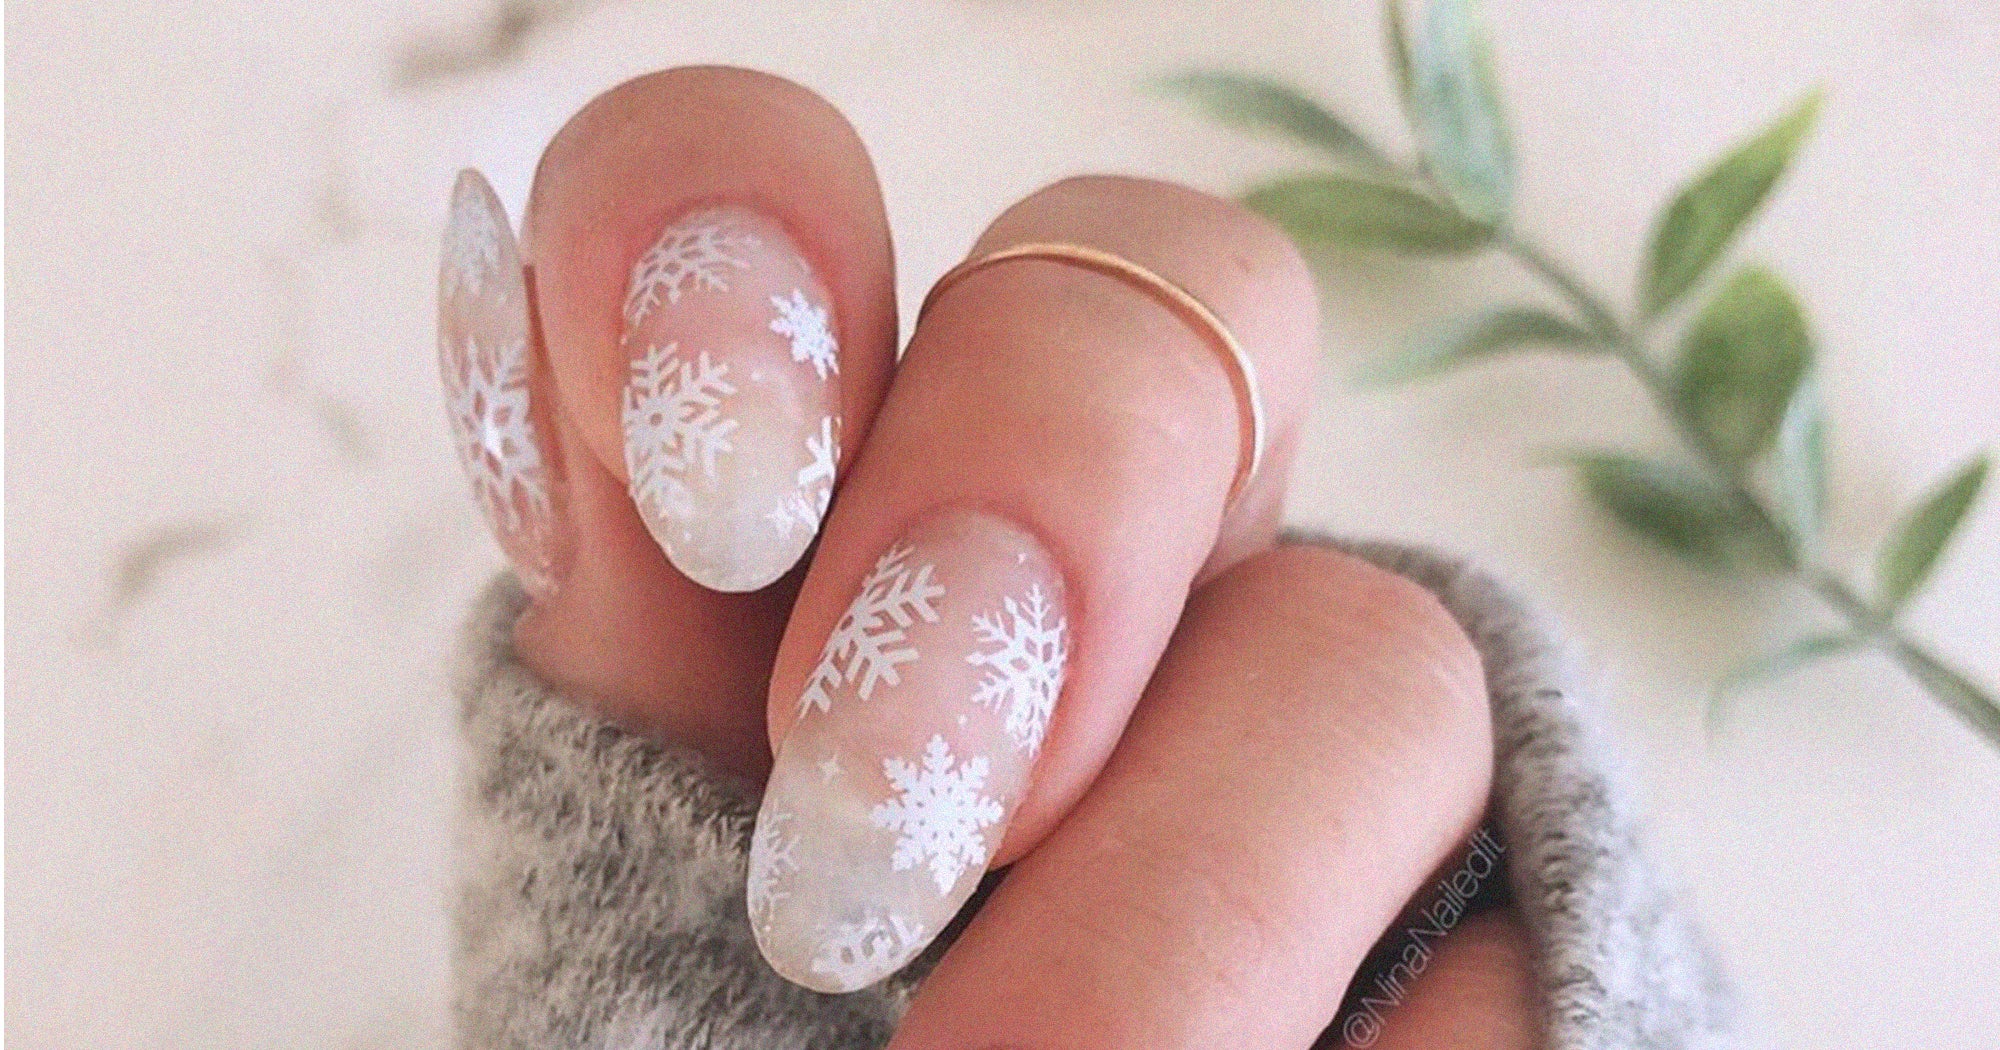 5. "Sparkling Christmas Manicure" - wide 3